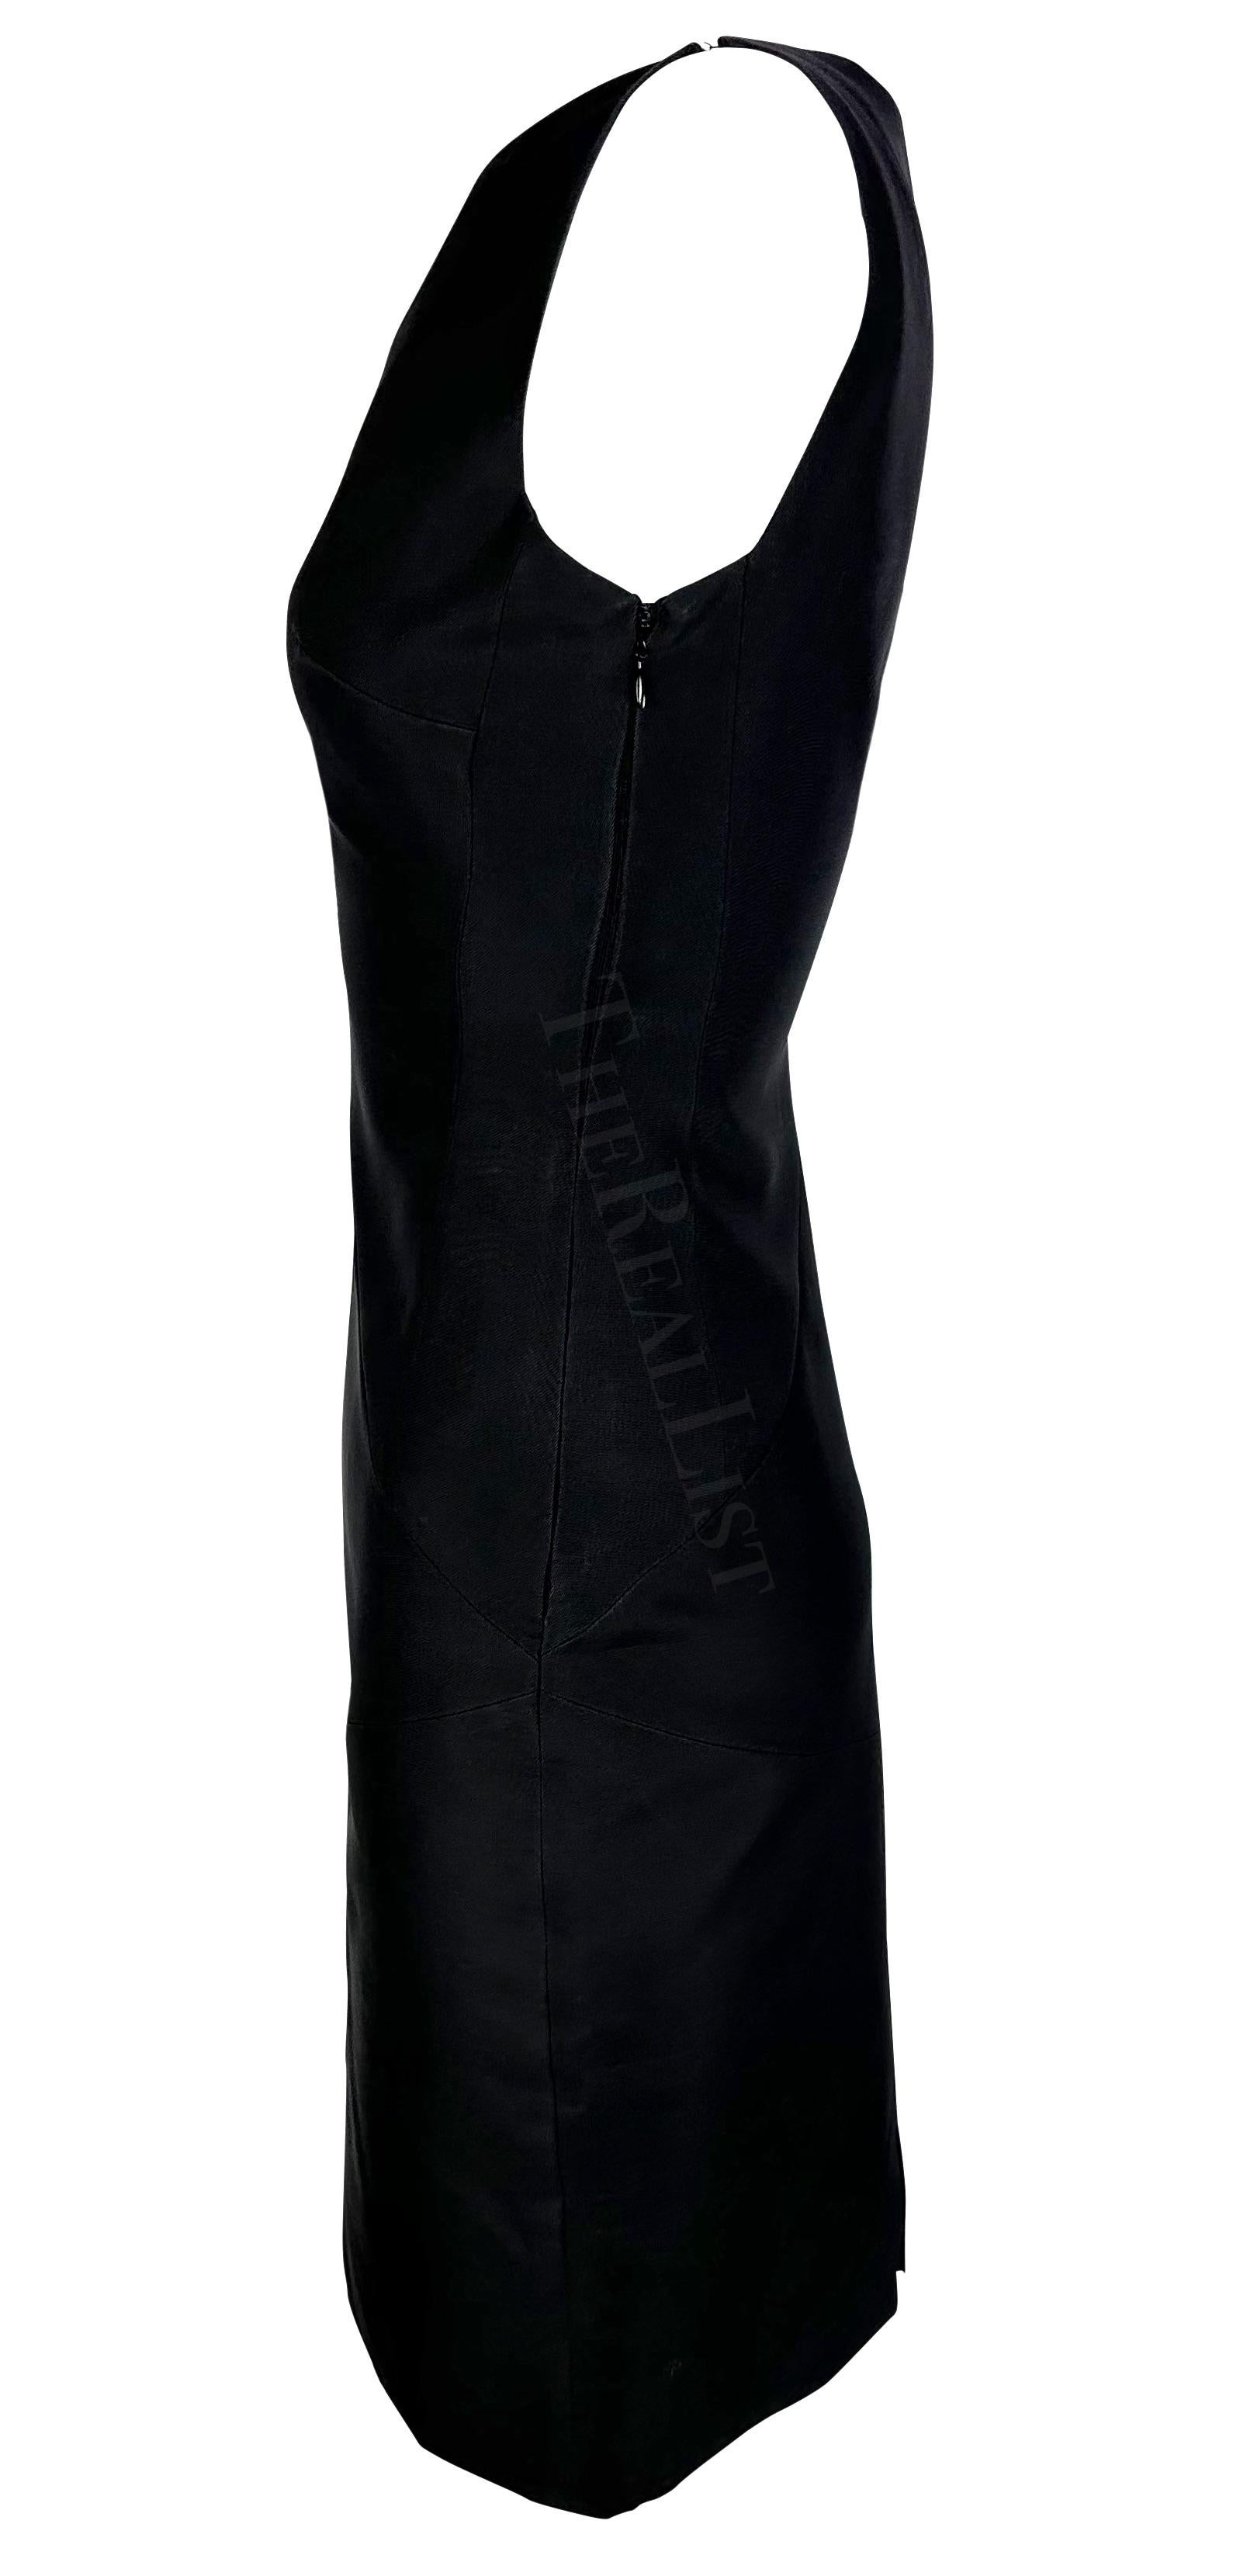 S/S 1998 Gucci by Tom Ford Runway Black Sleeveless Panel Bodycon Bateau Dress For Sale 1